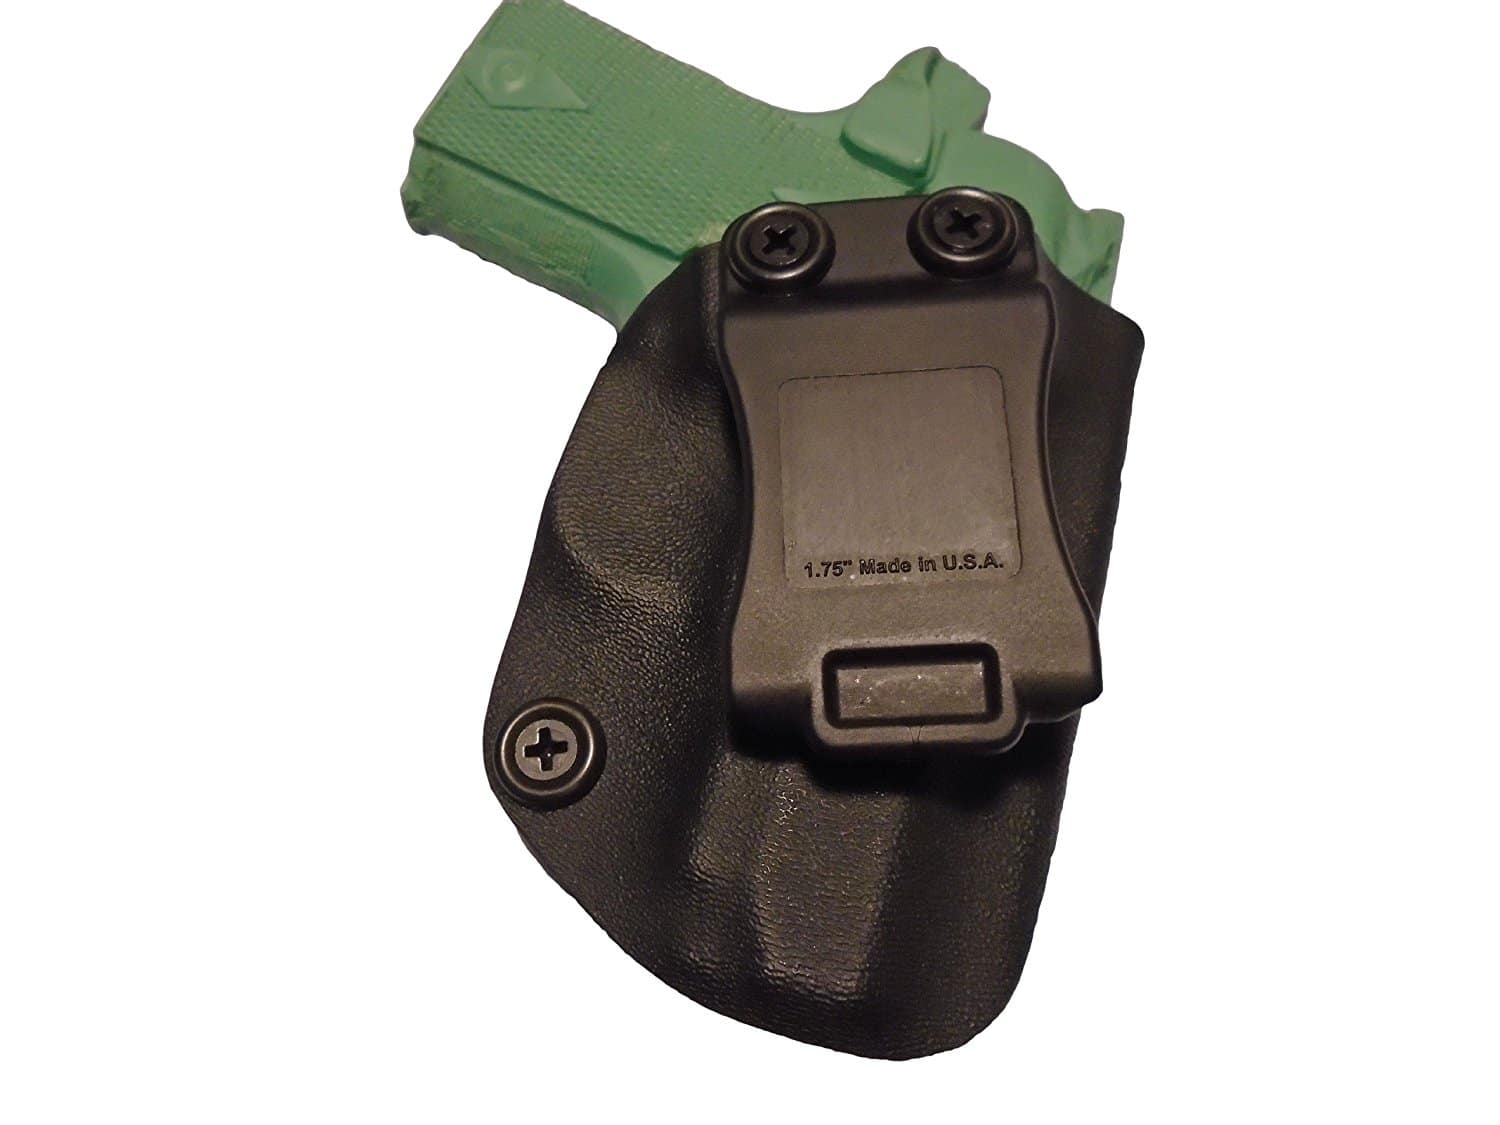  IWB sig P238 Holster by Badger Concealment